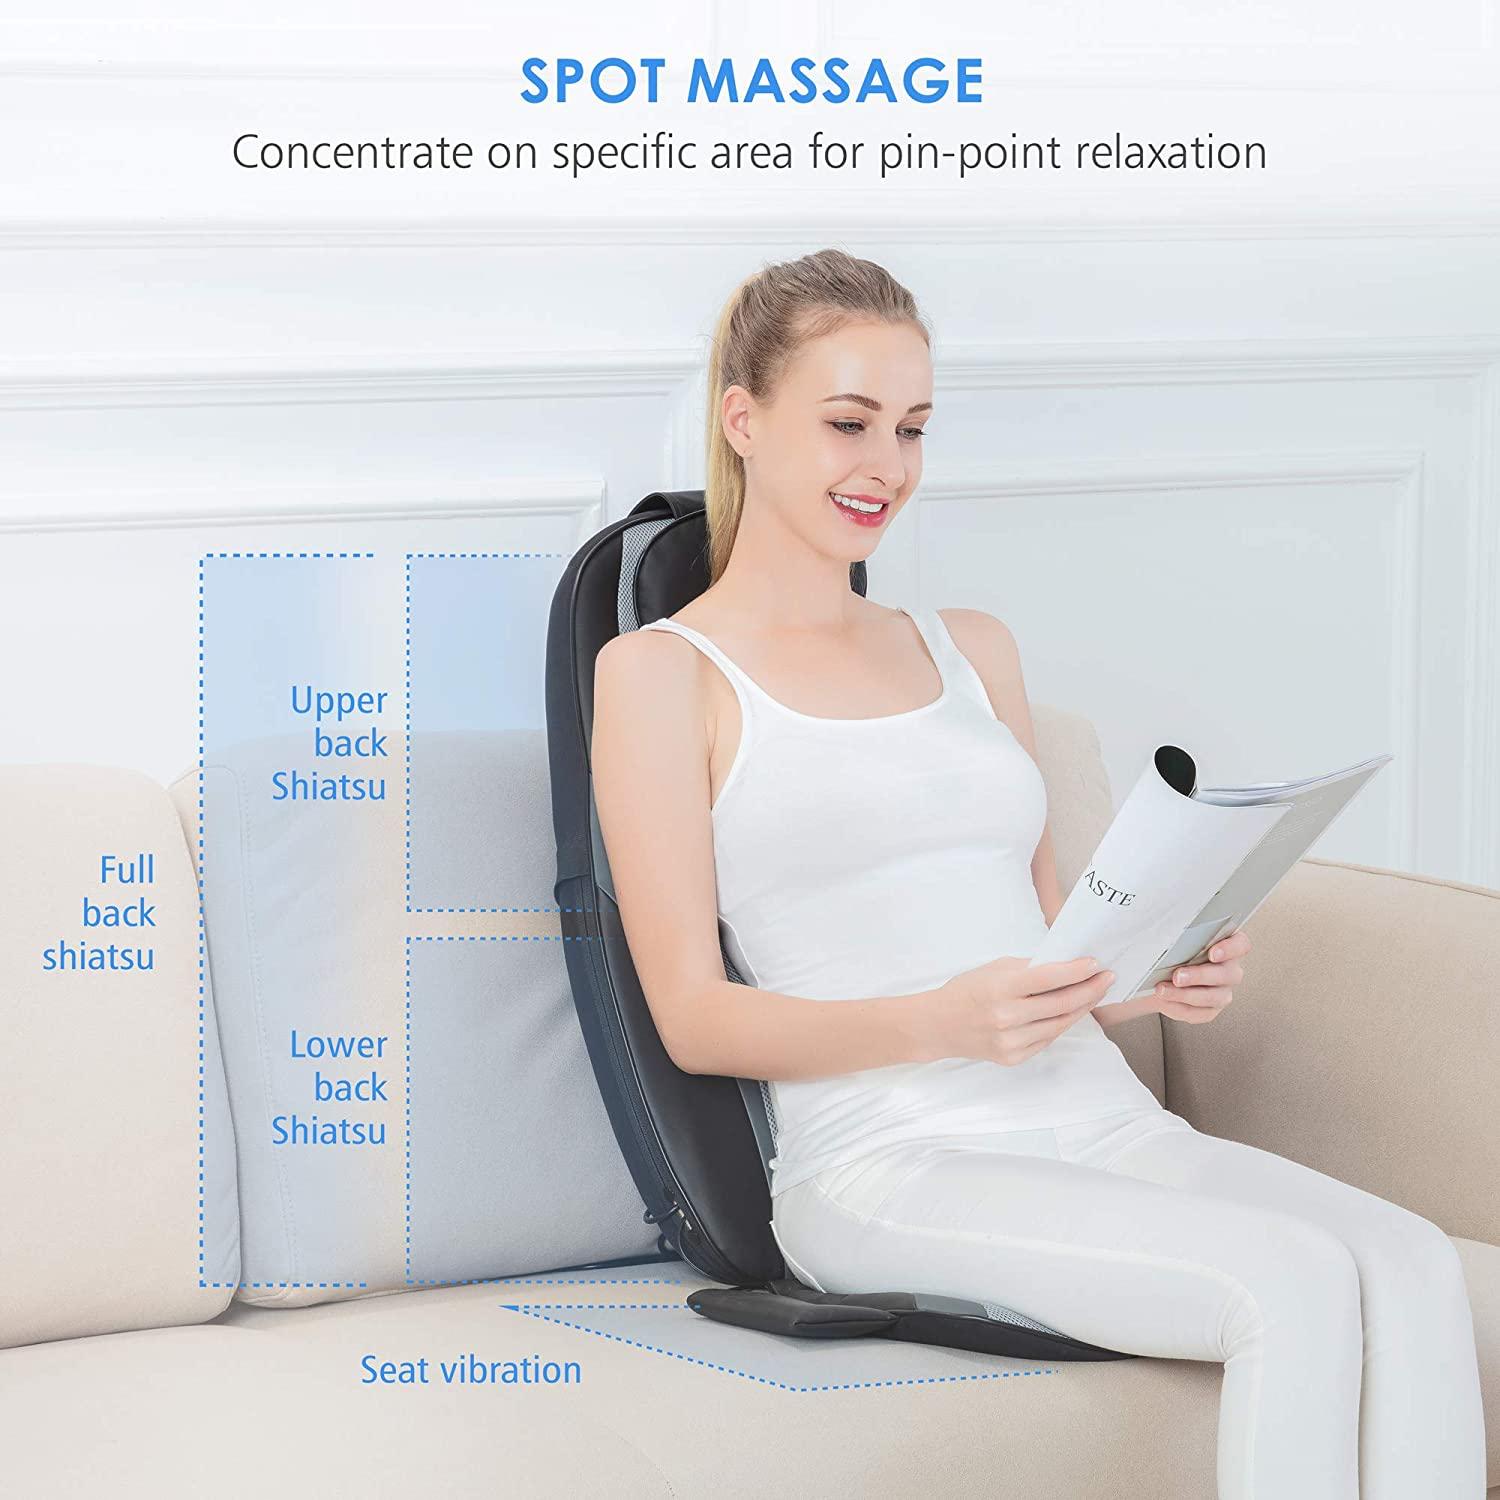  Snailax Back Massager with Soothing Heat, Gifts for Men, Women,  Electric Deep Tissue Kneading Massage Chair Pad for Full Back, Body, Pain  Relief, Home, Office Use : Health & Household